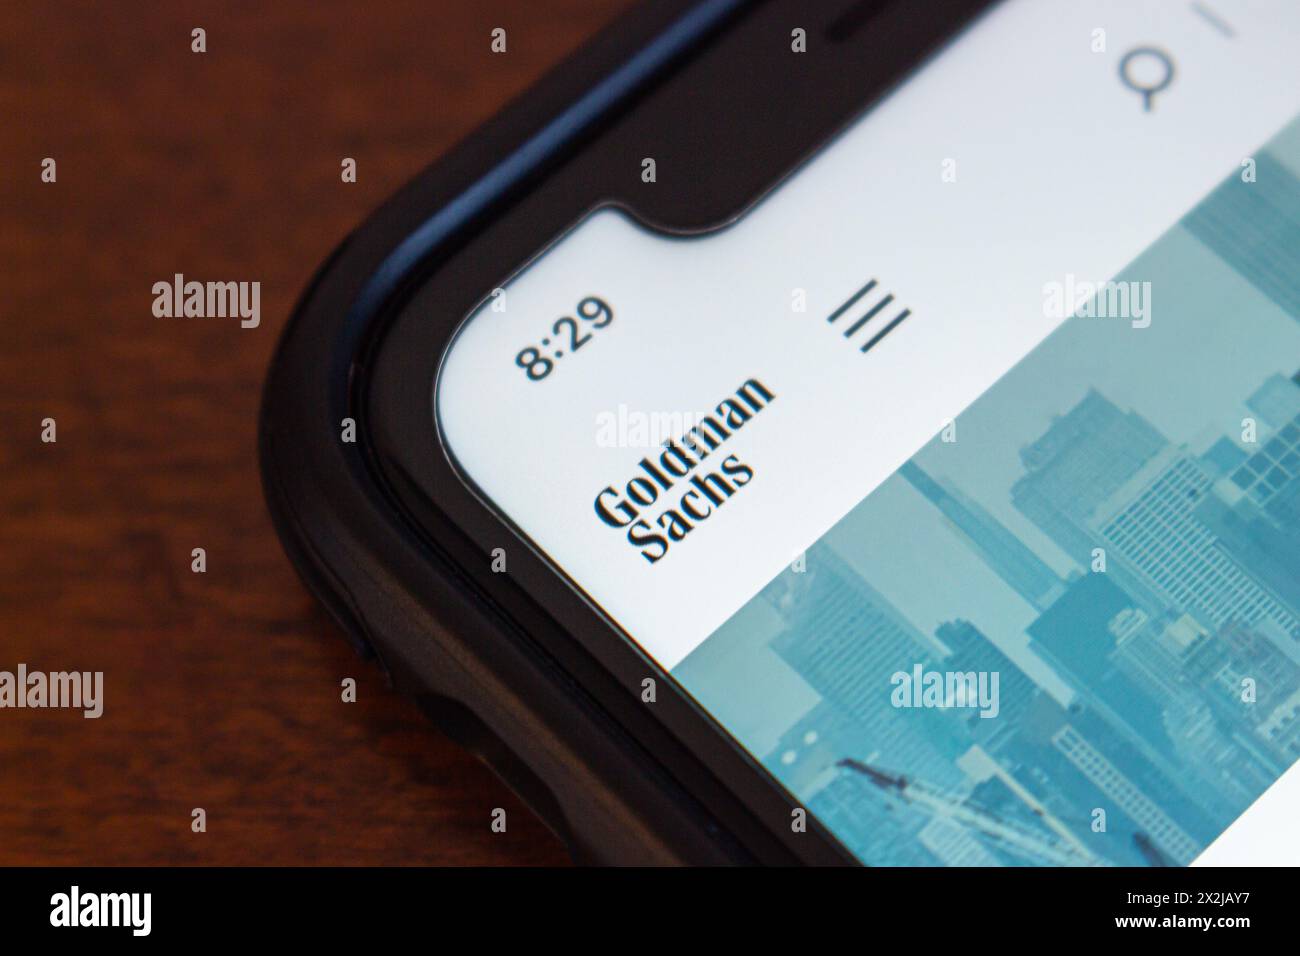 Goldman Sachs logo seen in its website on iPhone. The Goldman Sachs Group, Inc. is an US multinational investment bank and financial services company Stock Photo